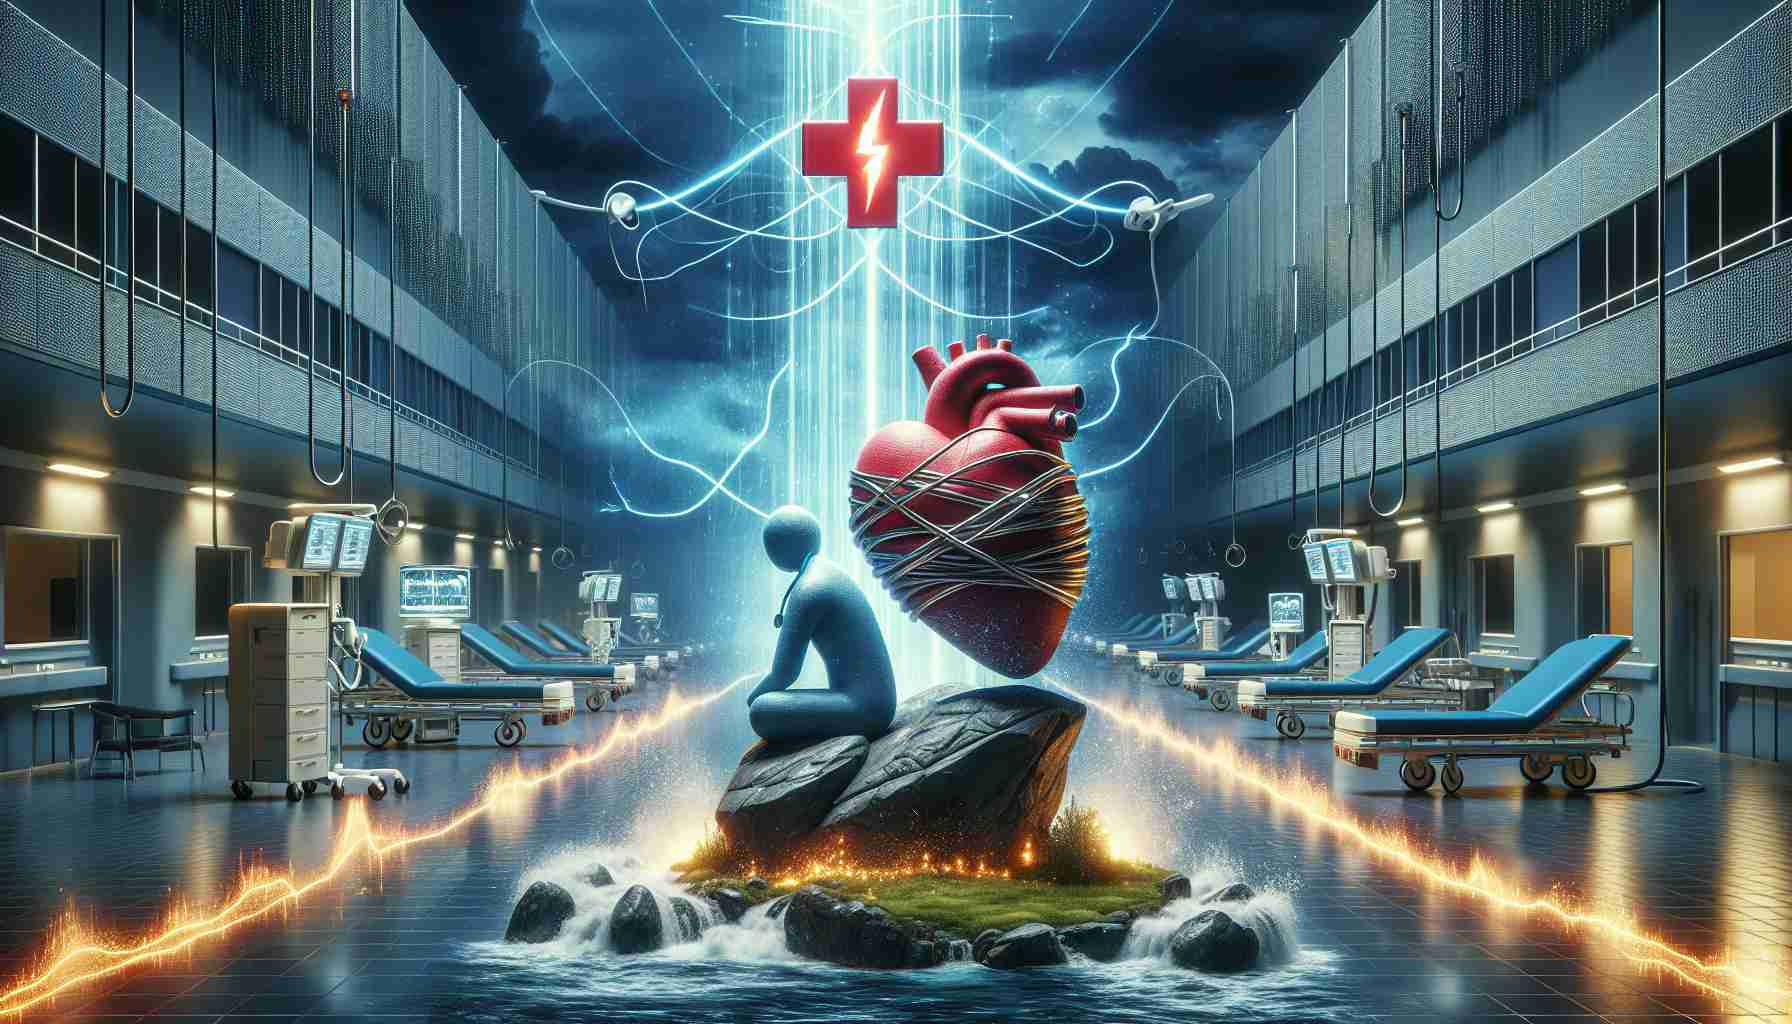 High-definition digital rendering of a symbolic scene representing the enduring power of healthcare in the midst of technological change and instability. The setting could be a modern hospital, clean and bright with high-tech equipment. Amidst this, there's a calming figure symbolizing healthcare – perhaps a stethoscope, a red cross or a heart. Metaphors for resilience should be included, like a rock standing firm against rough waves. Additionally, elements representing technological turmoil could be shown as tangled wires, flashing error codes, or sparking machinery.